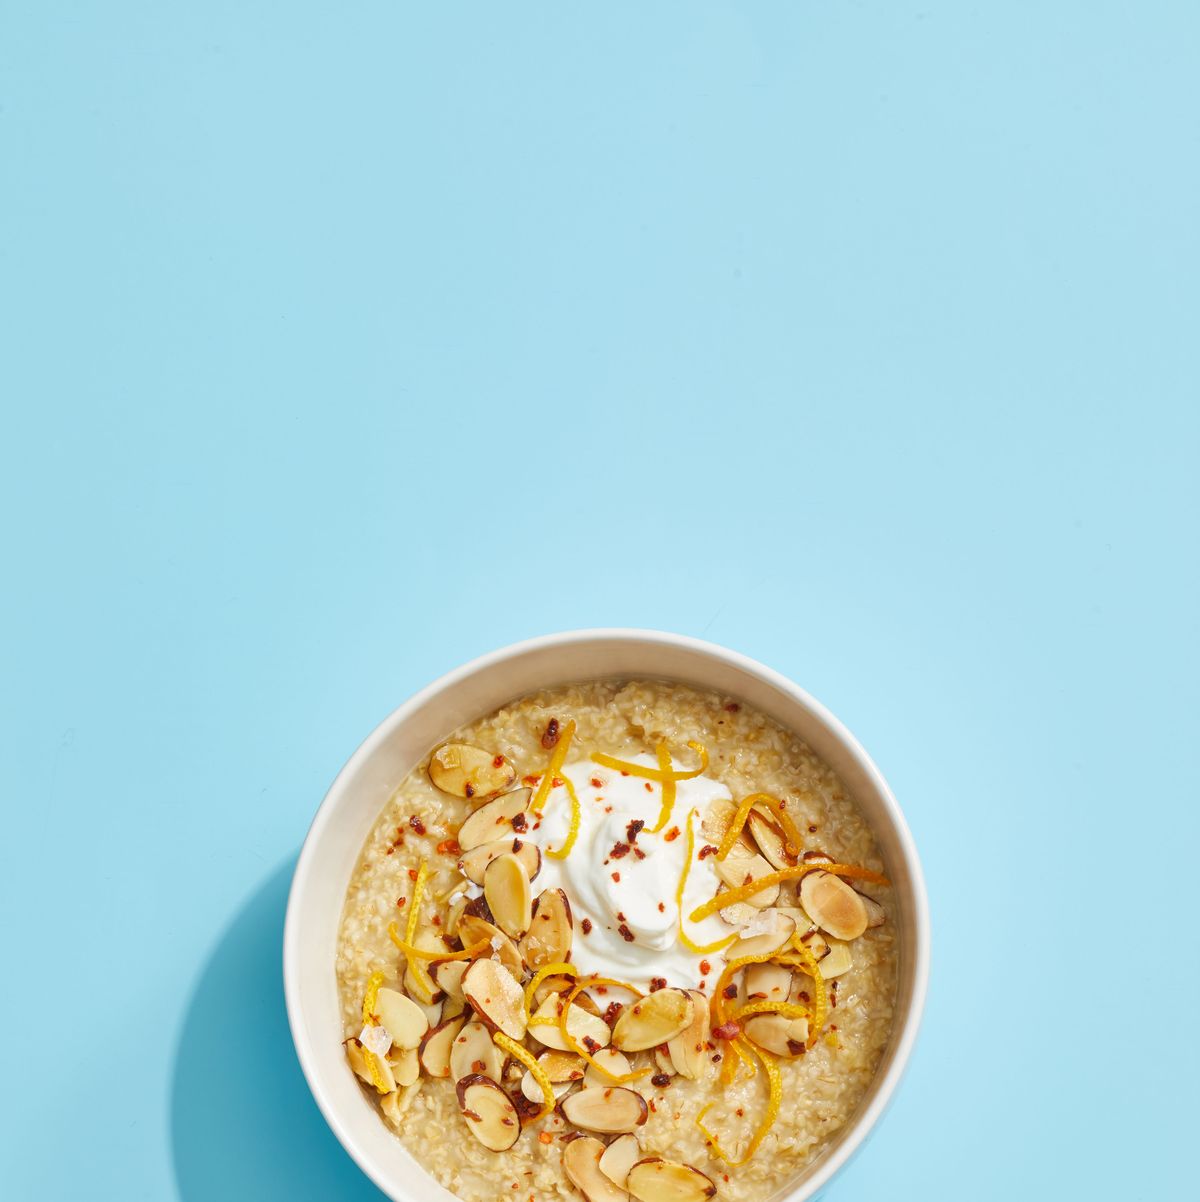 Best Oatmeal with Yogurt and Toasted Almonds Recipe - How To Make